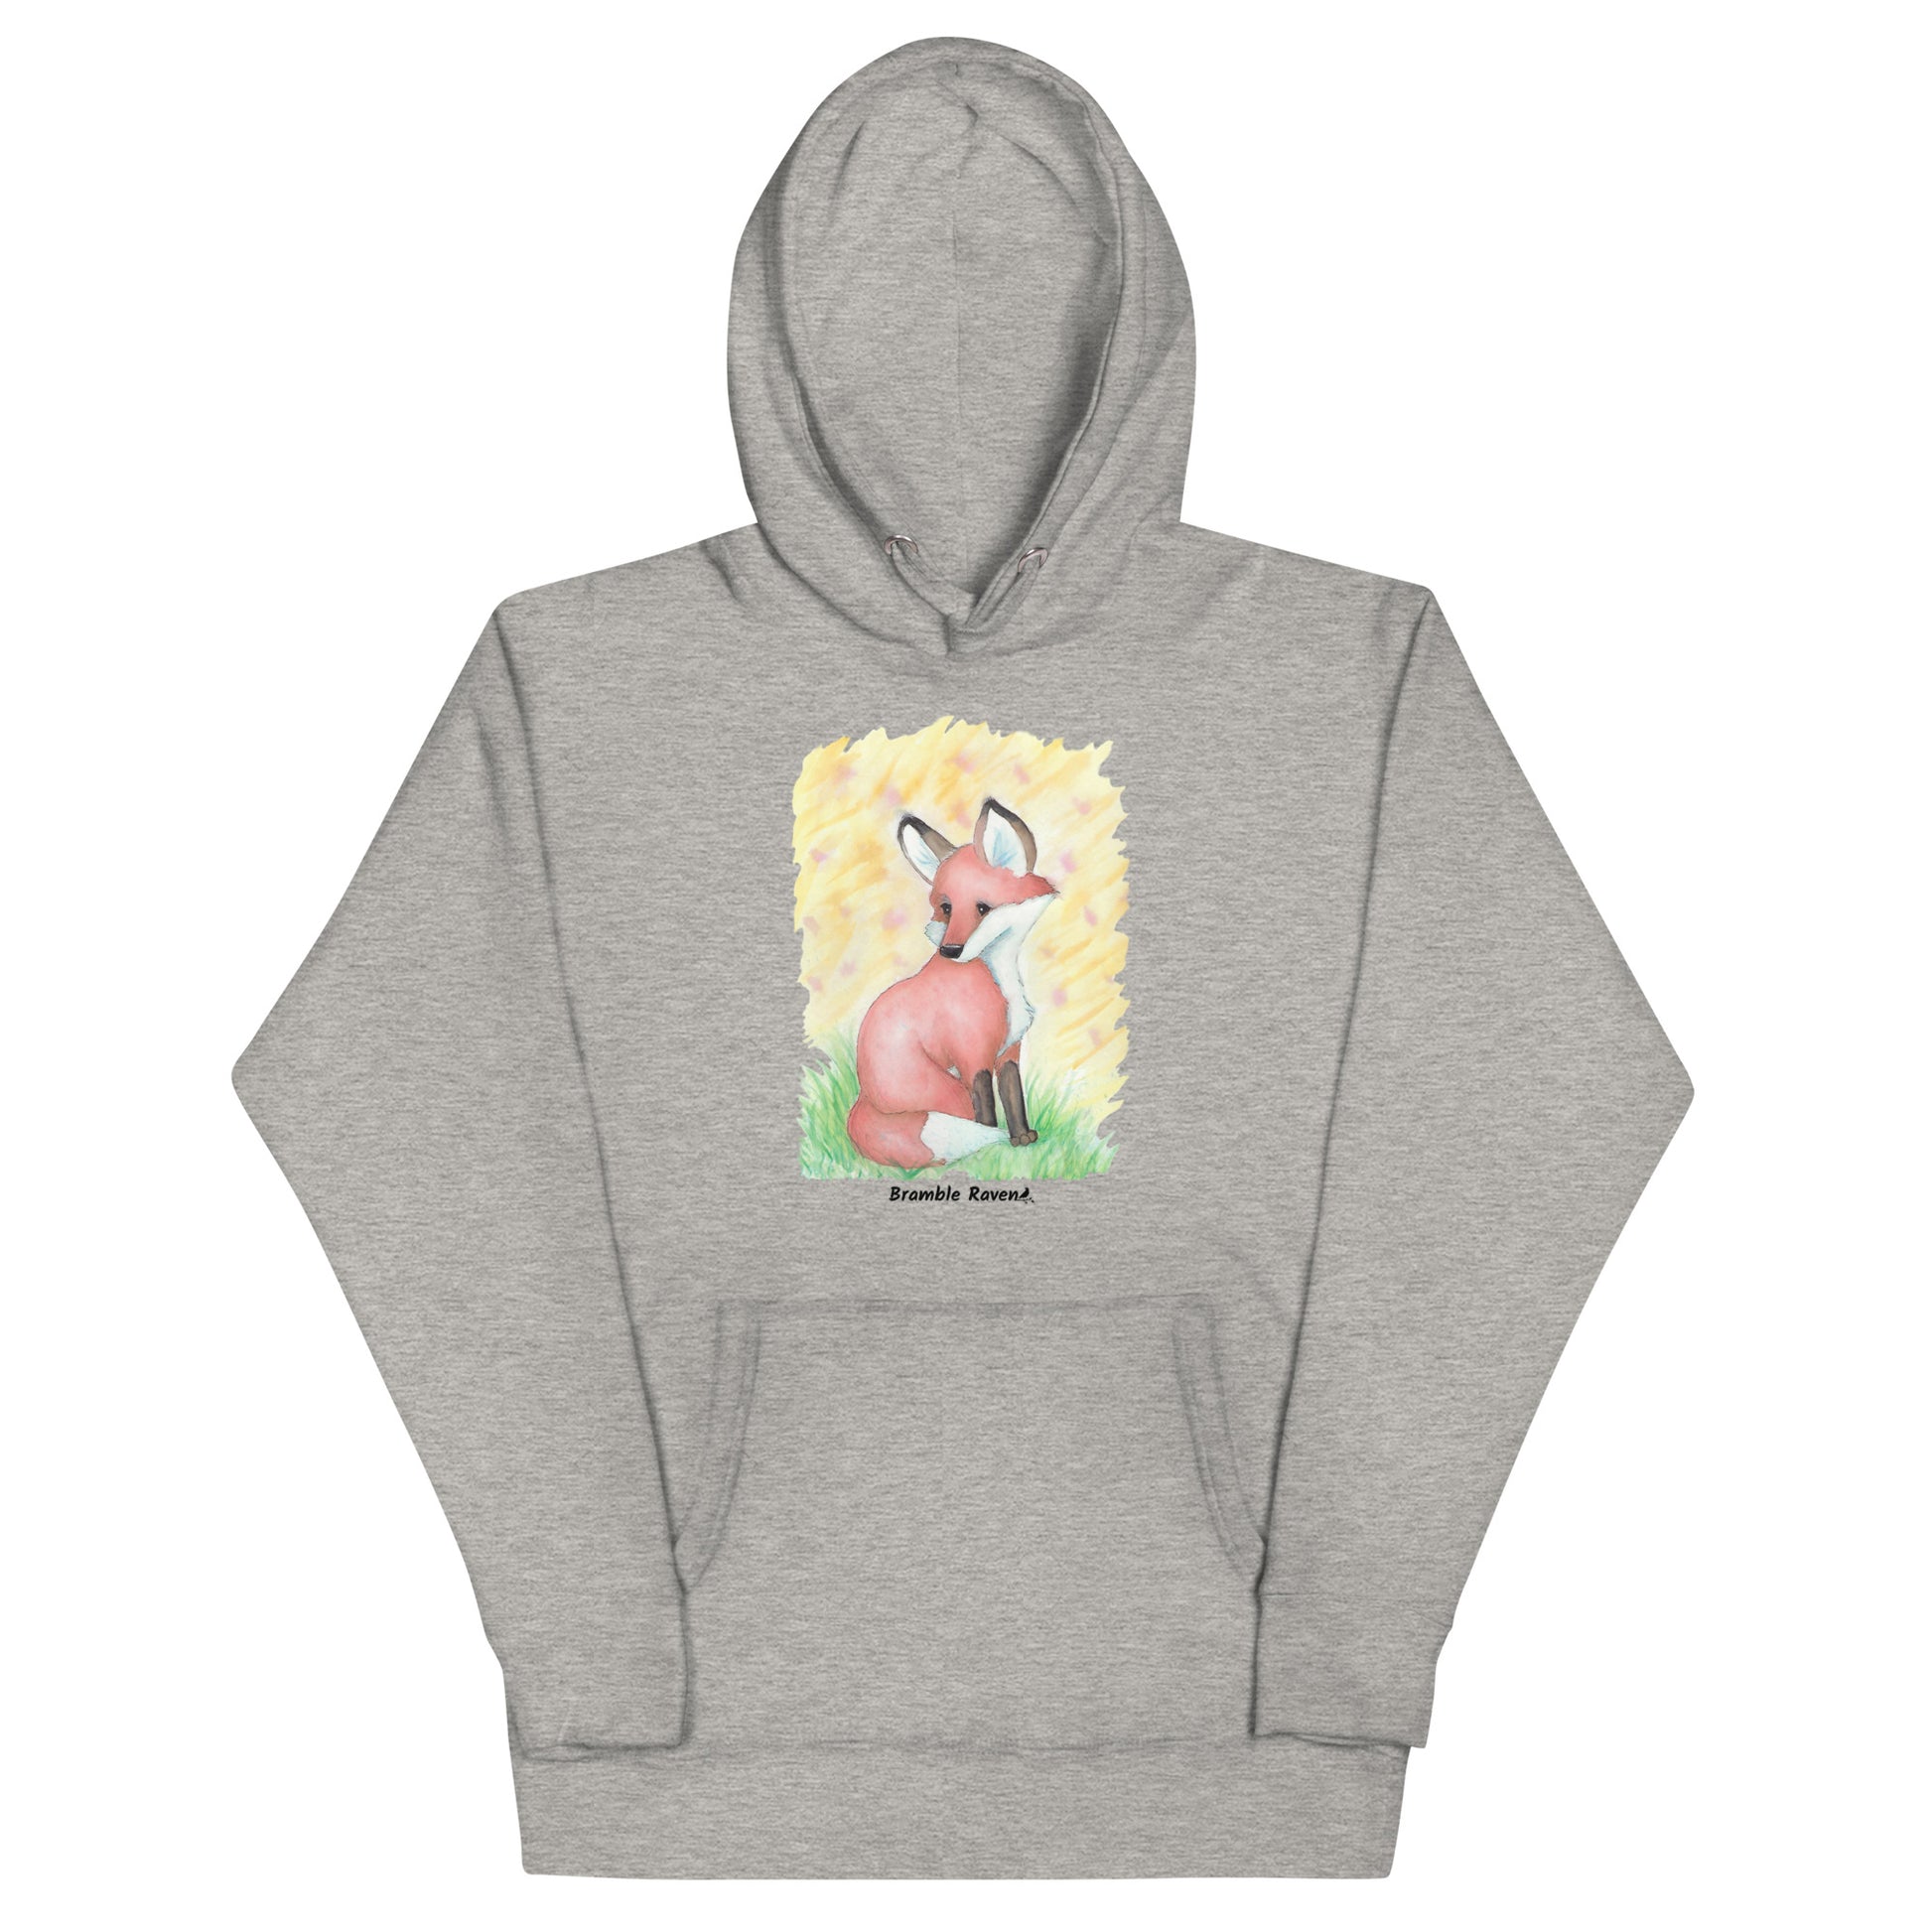 Unisex carbon grey colored hoodie. Features original watercolor painting of a fox in the grass against a yellow backdrop.